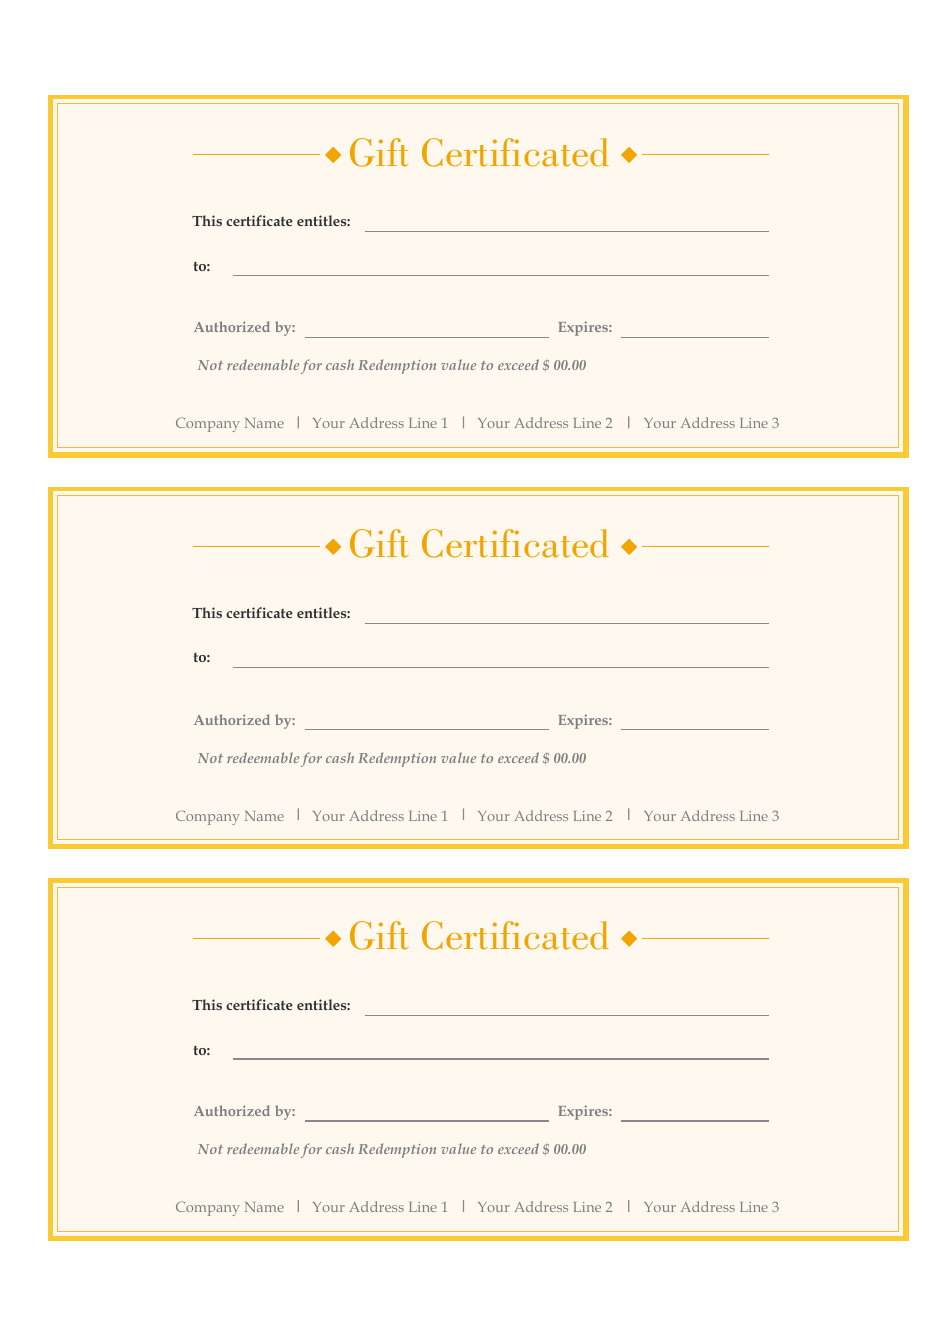 Gift Certificate Template in Yellow Color